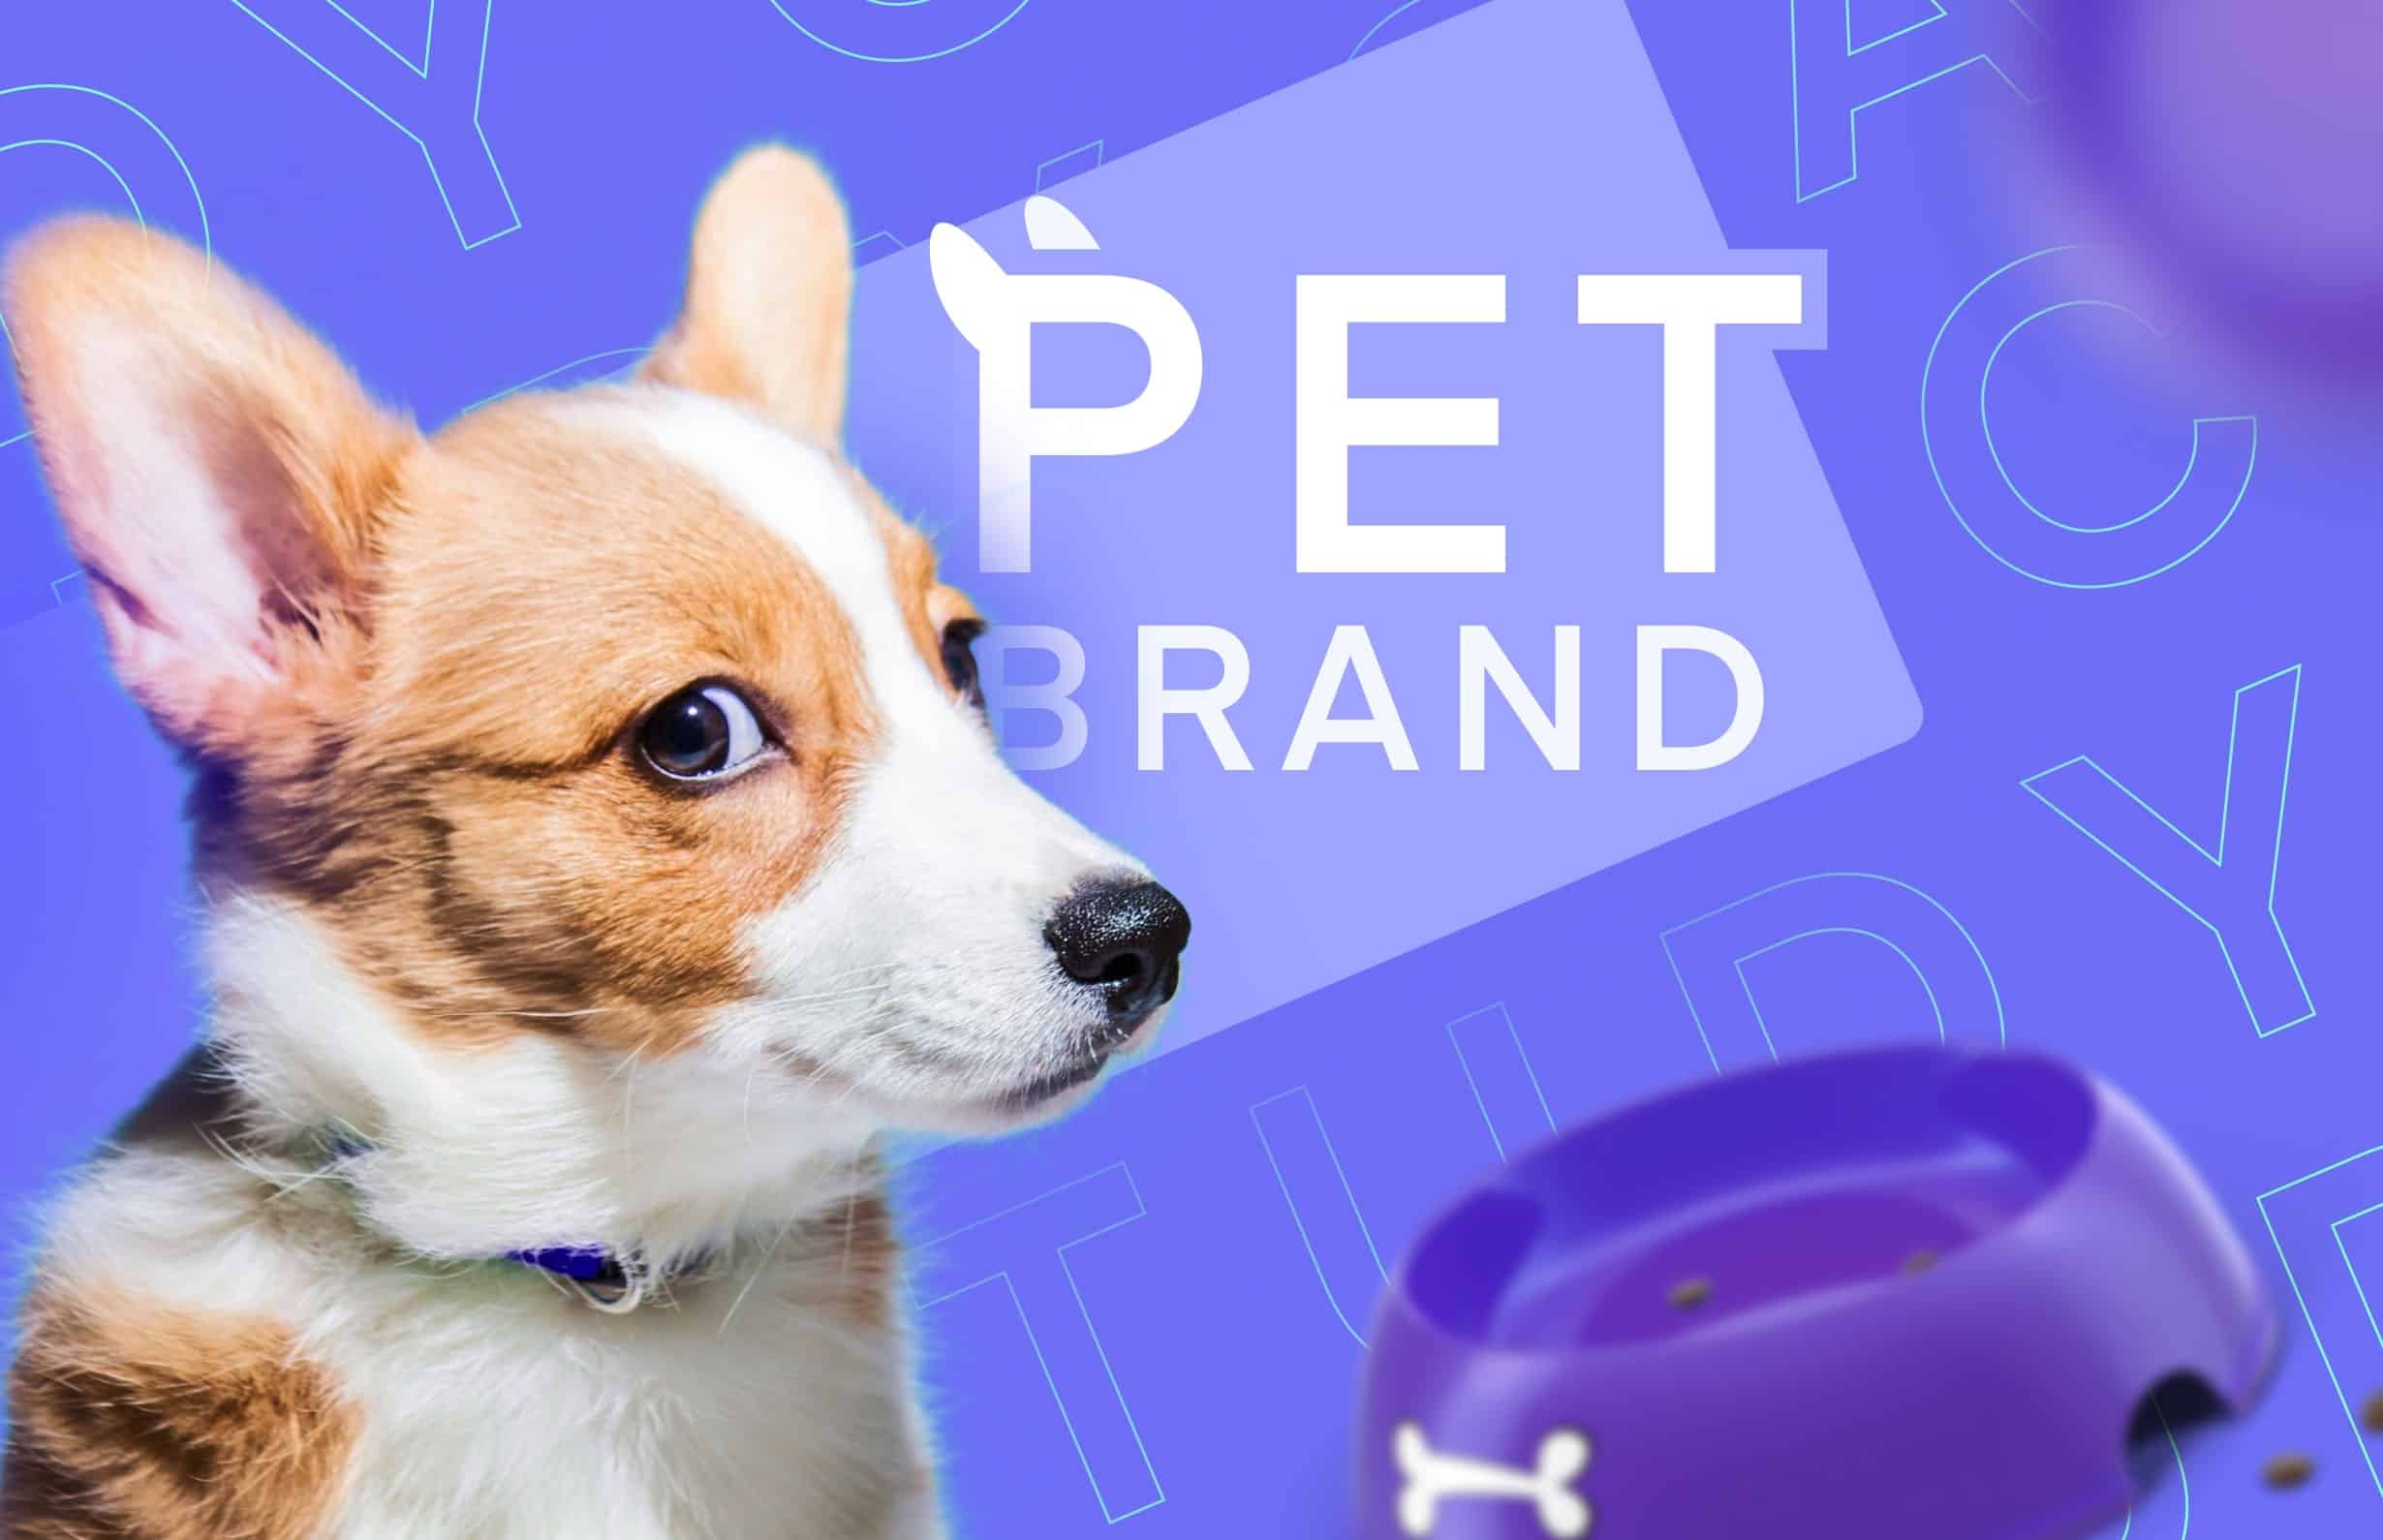 Amazon Exit Case Study: Helping a Pet Brand to Grow Before Selling Its Amazon Business